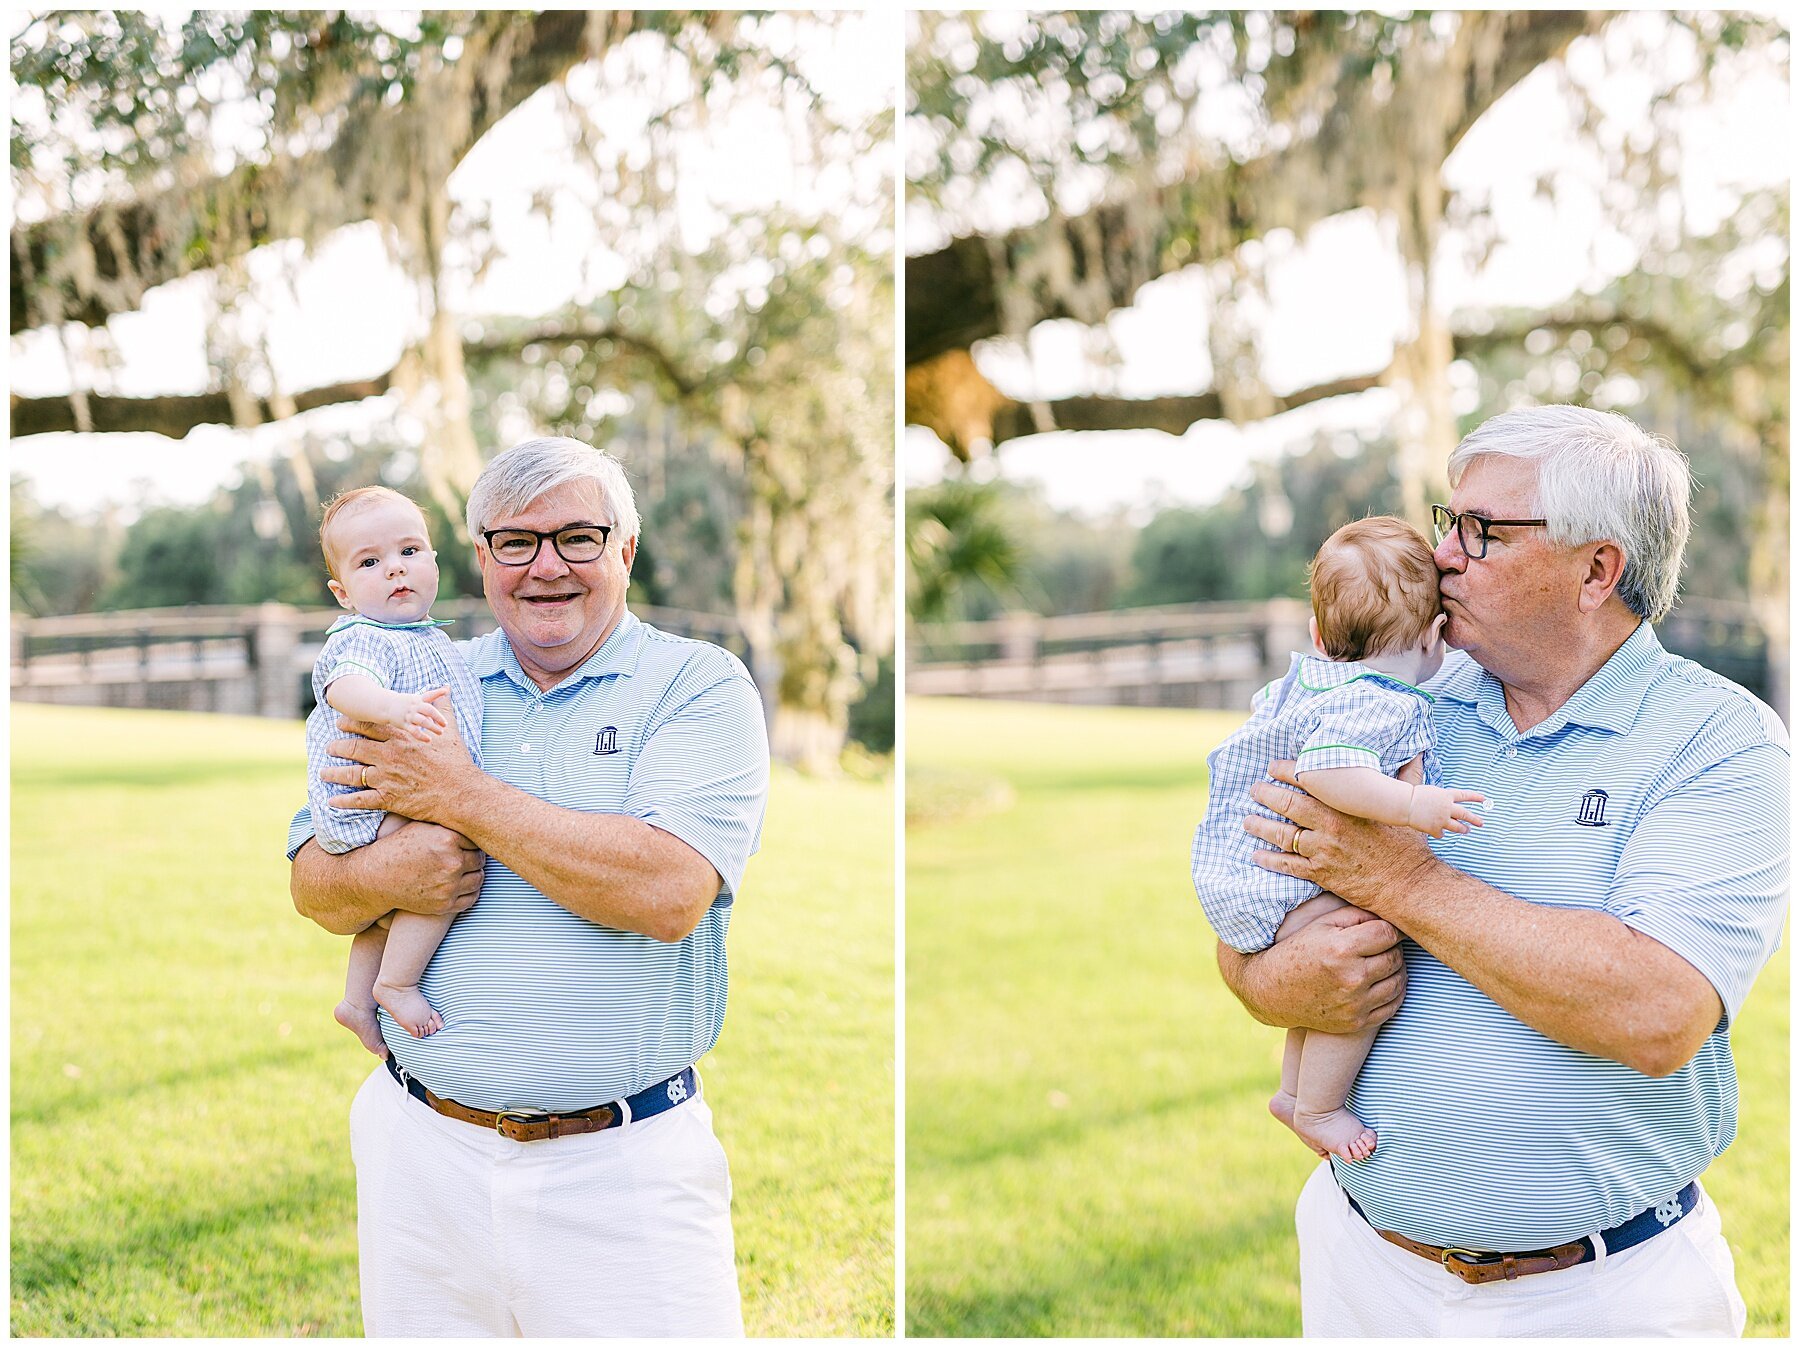 Katherine_Ives_Photography_Montage_Palmetto_Bluff_Oden_Family_12.jpg